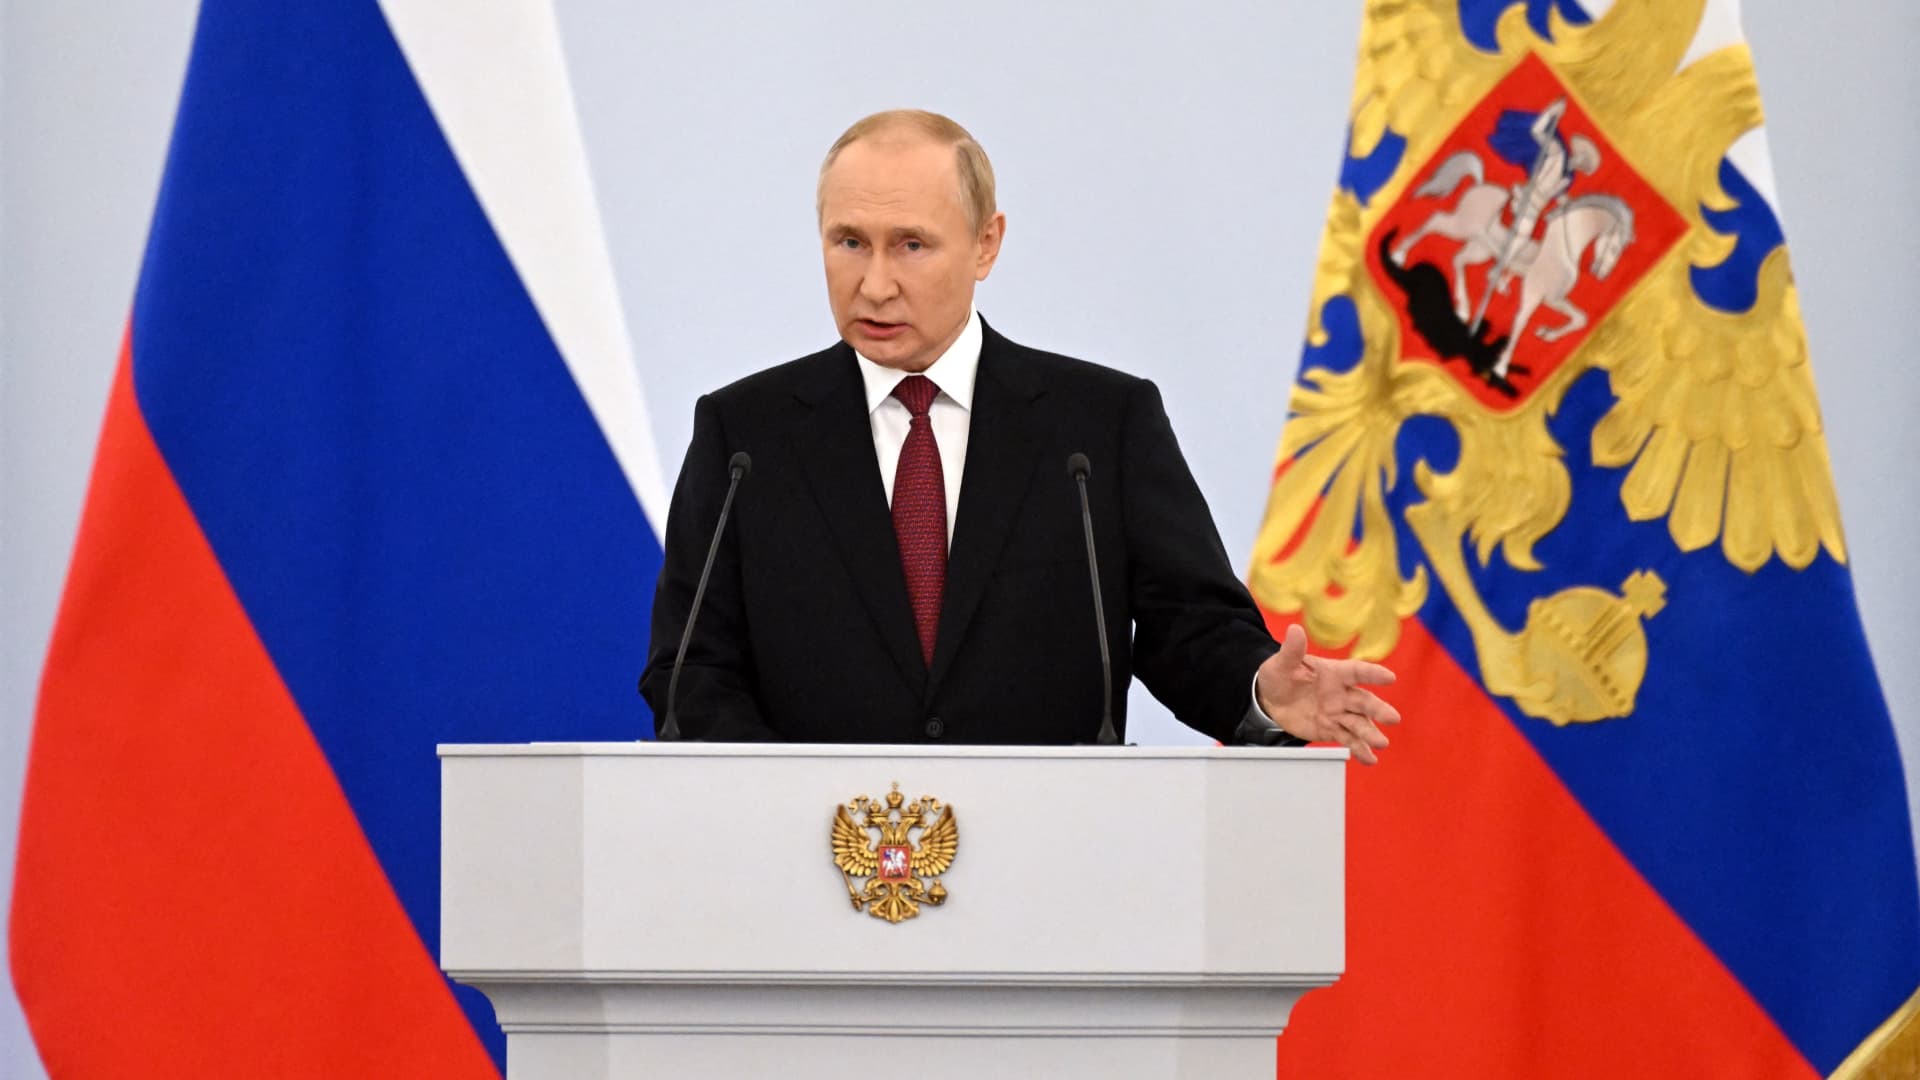 Russian President Vladimir Putin gives a speech during a ceremony formally annexing four regions of Ukraine Russian troops occupy, at the Kremlin in Moscow on September 30, 2022.